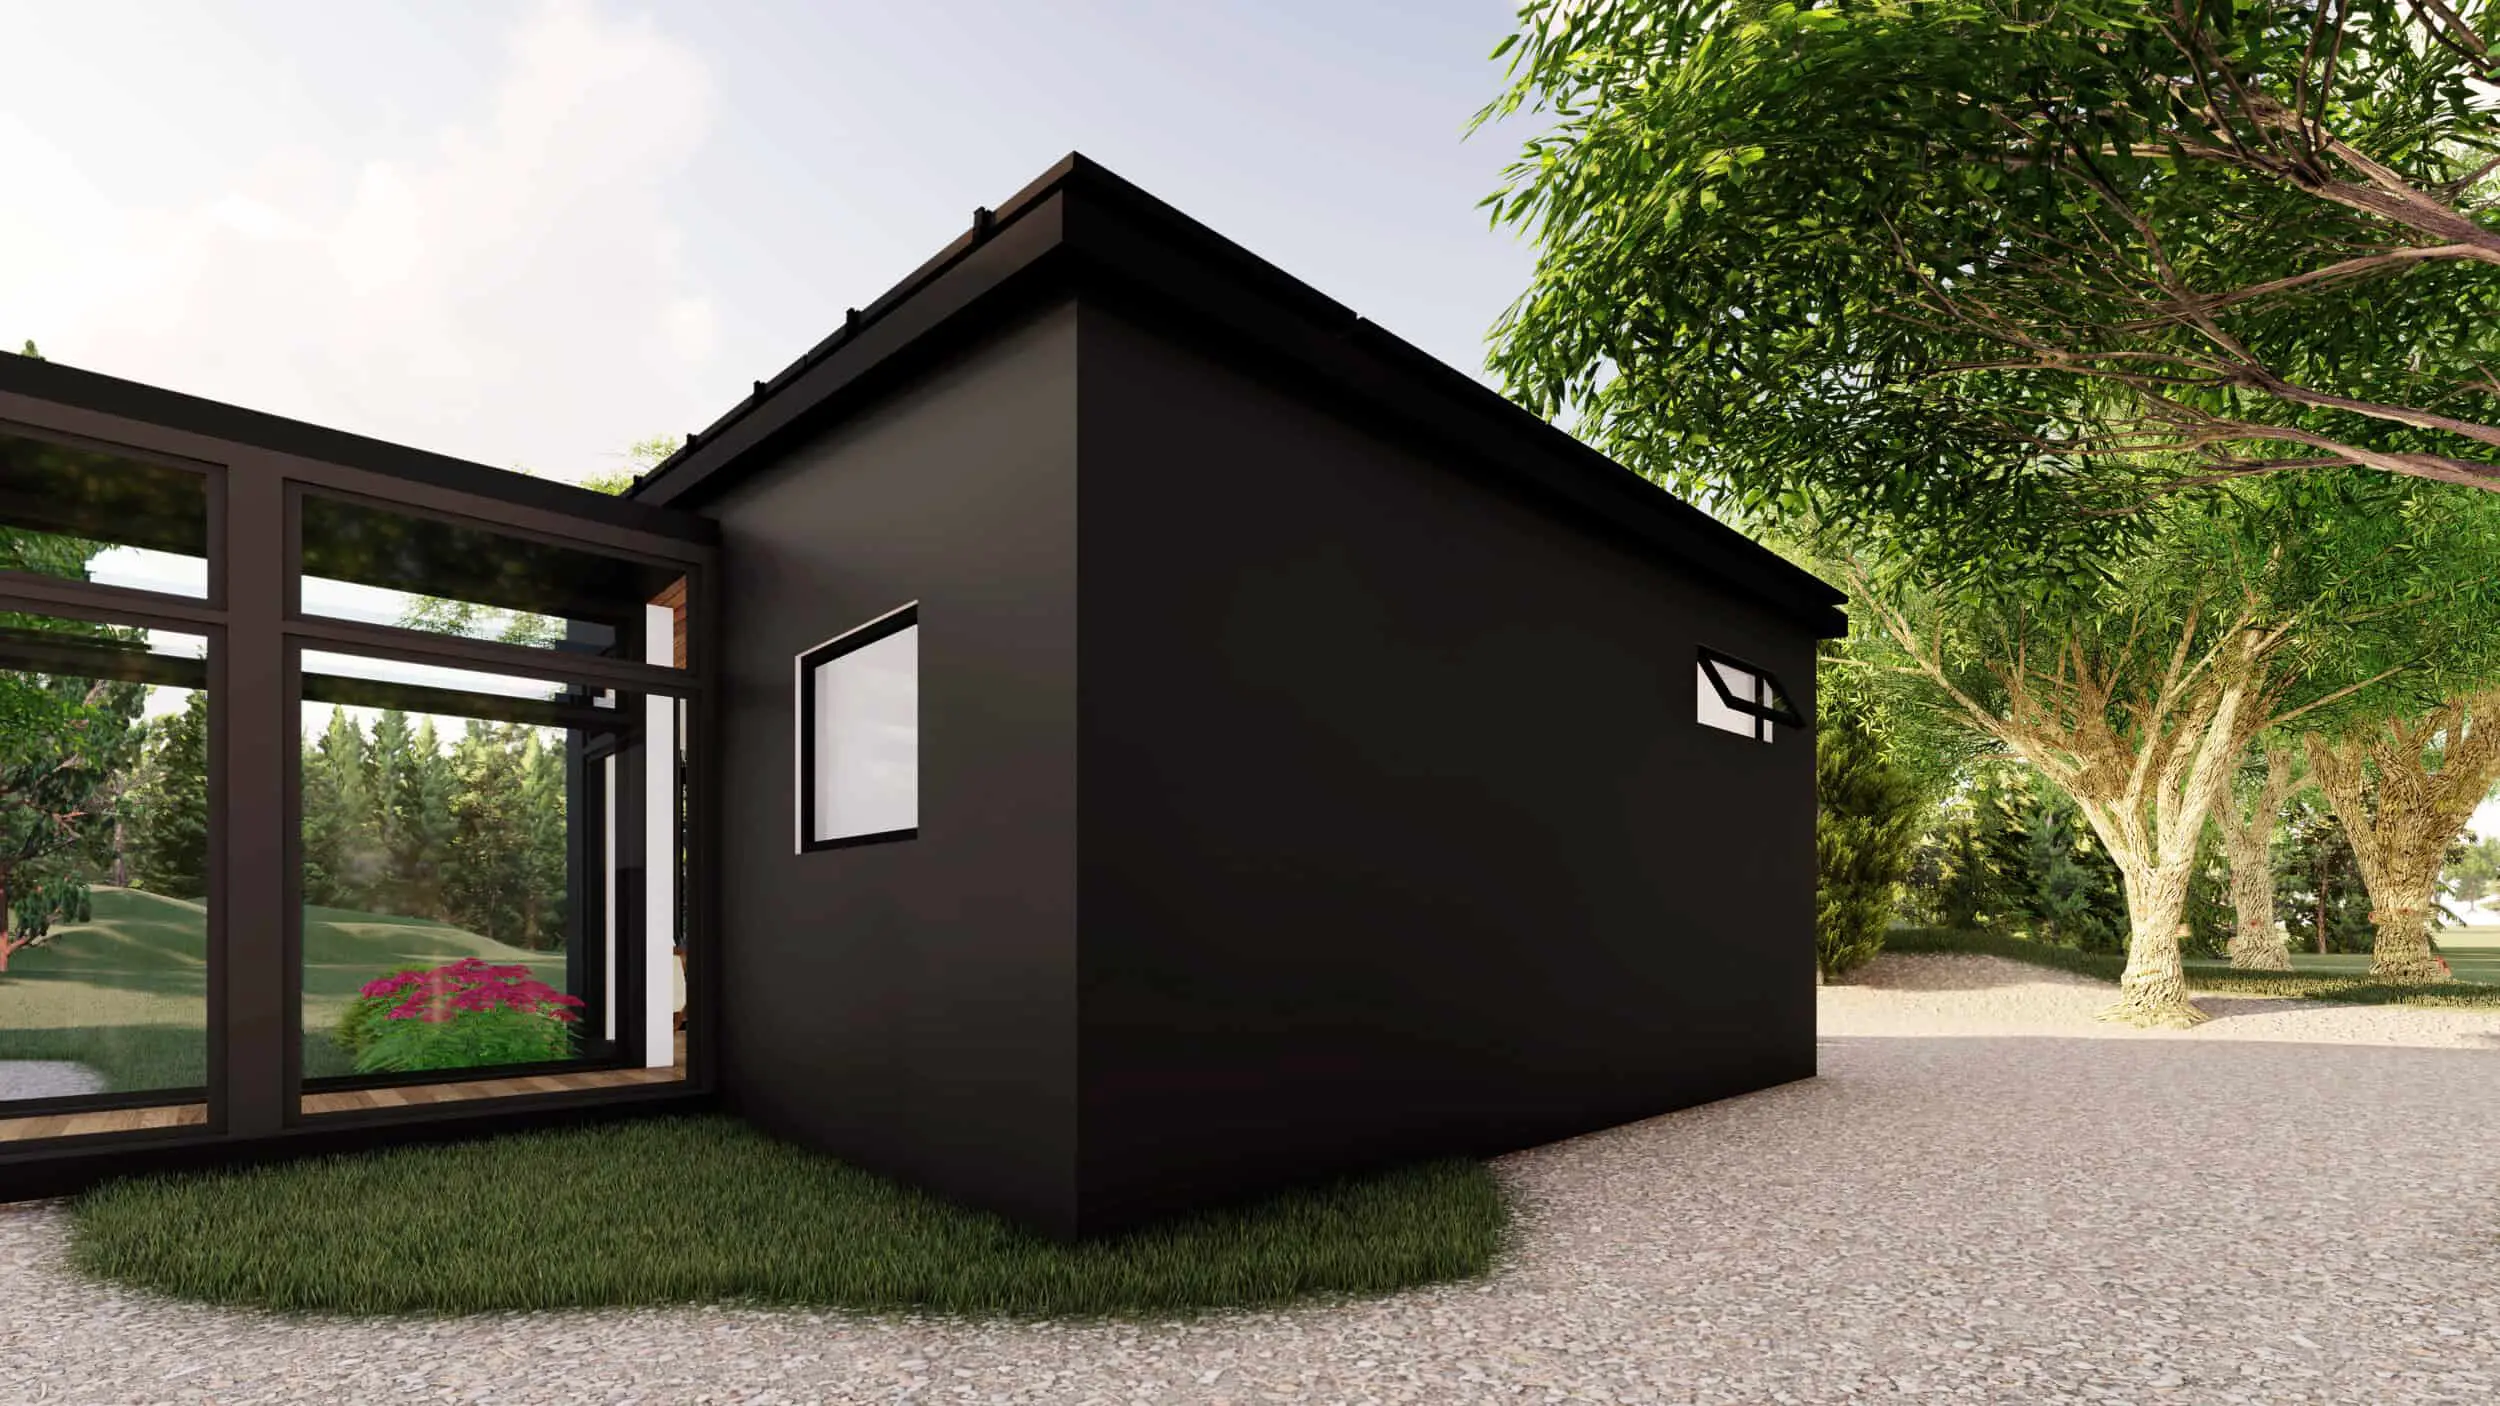 Stack Homes model 480 prefab home, exterior side view.